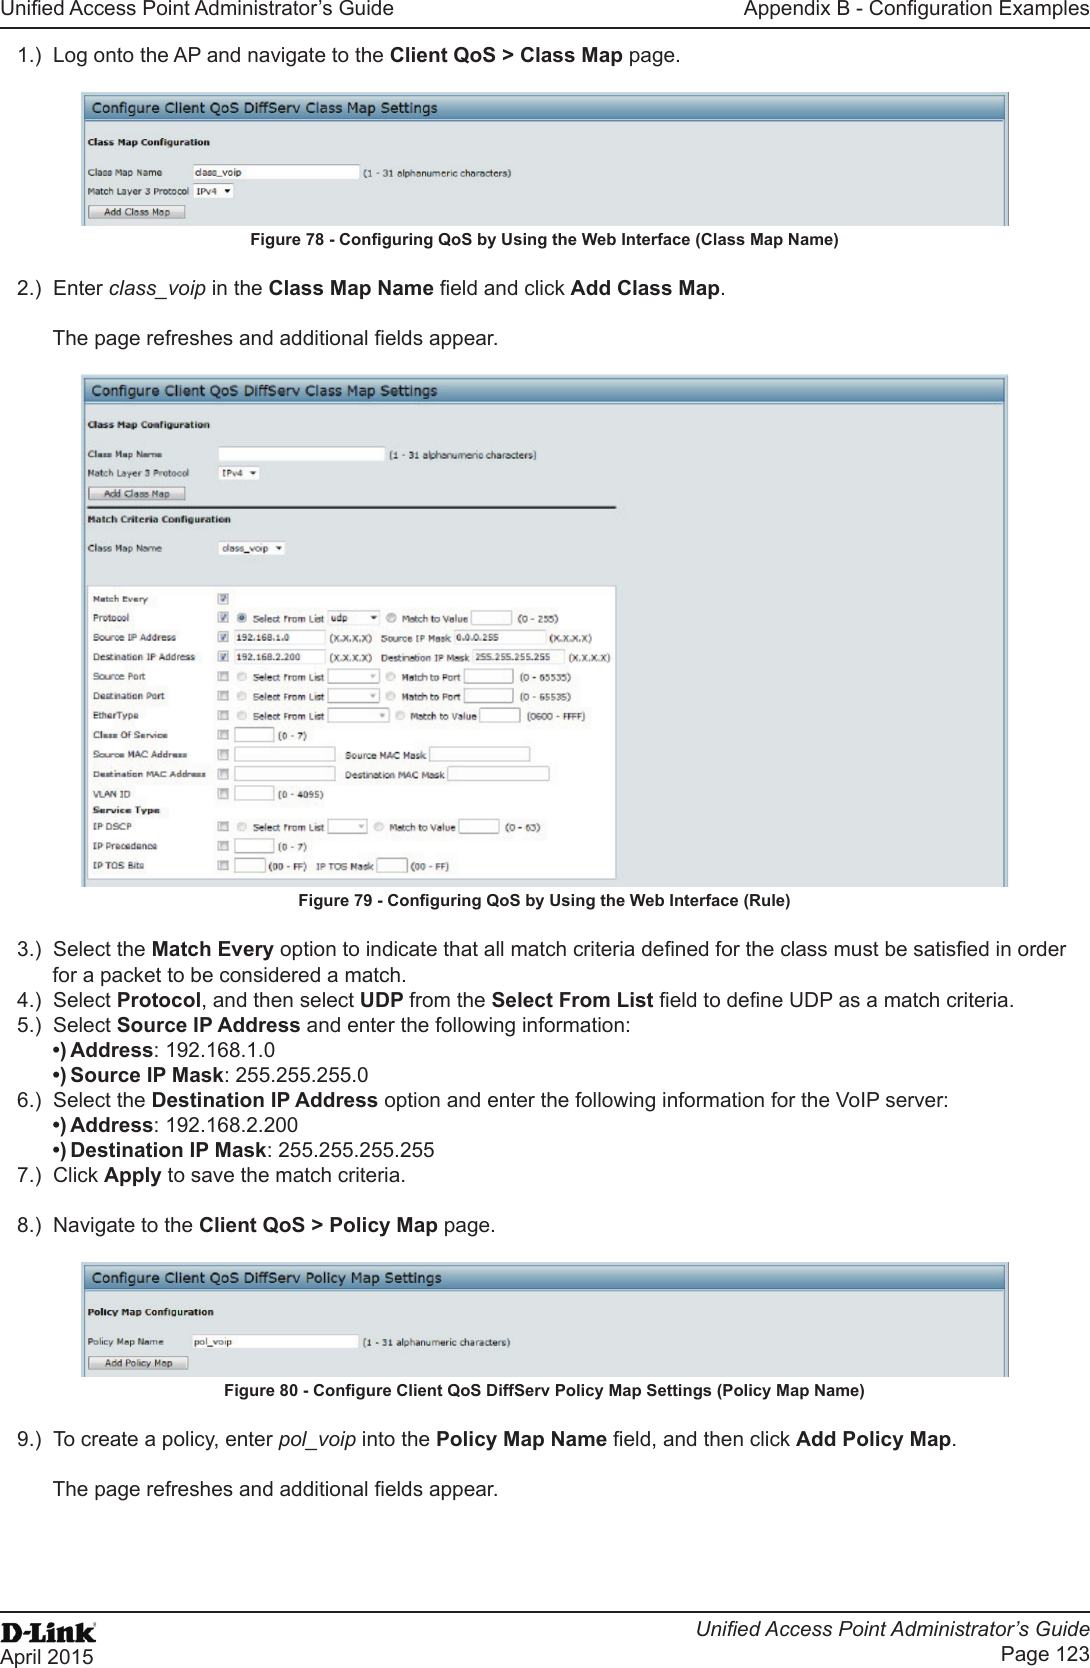 Unied Access Point Administrator’s GuideUnied Access Point Administrator’s GuidePage 123April 2015Appendix B - Conguration Examples1.)  Log onto the AP and navigate to the Client QoS &gt; Class Map page.Figure 78 - Conguring QoS by Using the Web Interface (Class Map Name)2.)  Enter class_voip in the Class Map Name eld and click Add Class Map.The page refreshes and additional elds appear. Figure 79 - Conguring QoS by Using the Web Interface (Rule)3.)  Select the Match Every option to indicate that all match criteria dened for the class must be satised in order for a packet to be considered a match.4.)  Select Protocol, and then select UDP from the Select From List eld to dene UDP as a match criteria. 5.)  Select Source IP Address and enter the following information: •) Address: 192.168.1.0•) Source IP Mask: 255.255.255.06.)  Select the Destination IP Address option and enter the following information for the VoIP server:•) Address: 192.168.2.200•) Destination IP Mask: 255.255.255.2557.)  Click Apply to save the match criteria.8.)  Navigate to the Client QoS &gt; Policy Map page.Figure 80 - Congure Client QoS DiffServ Policy Map Settings (Policy Map Name)9.)  To create a policy, enter pol_voip into the Policy Map Name eld, and then click Add Policy Map.The page refreshes and additional elds appear.